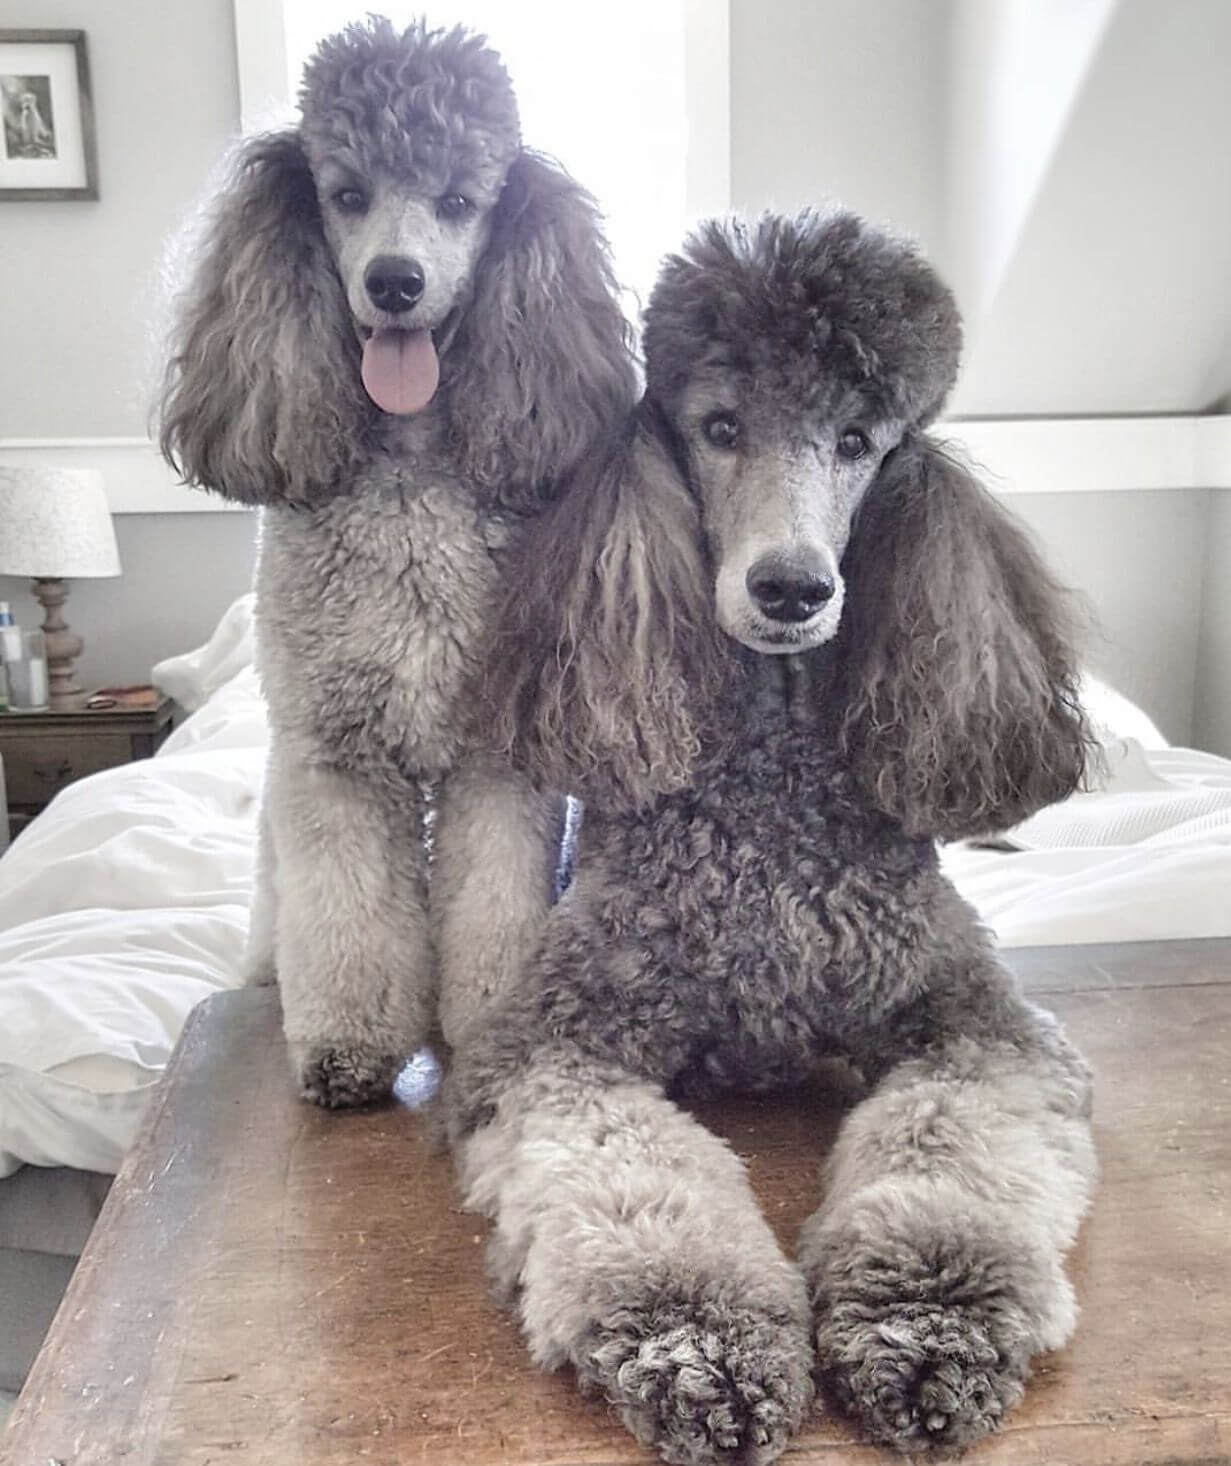 Do Poodles Have Webbed Feet? (Plus Other Facts about the Trait)